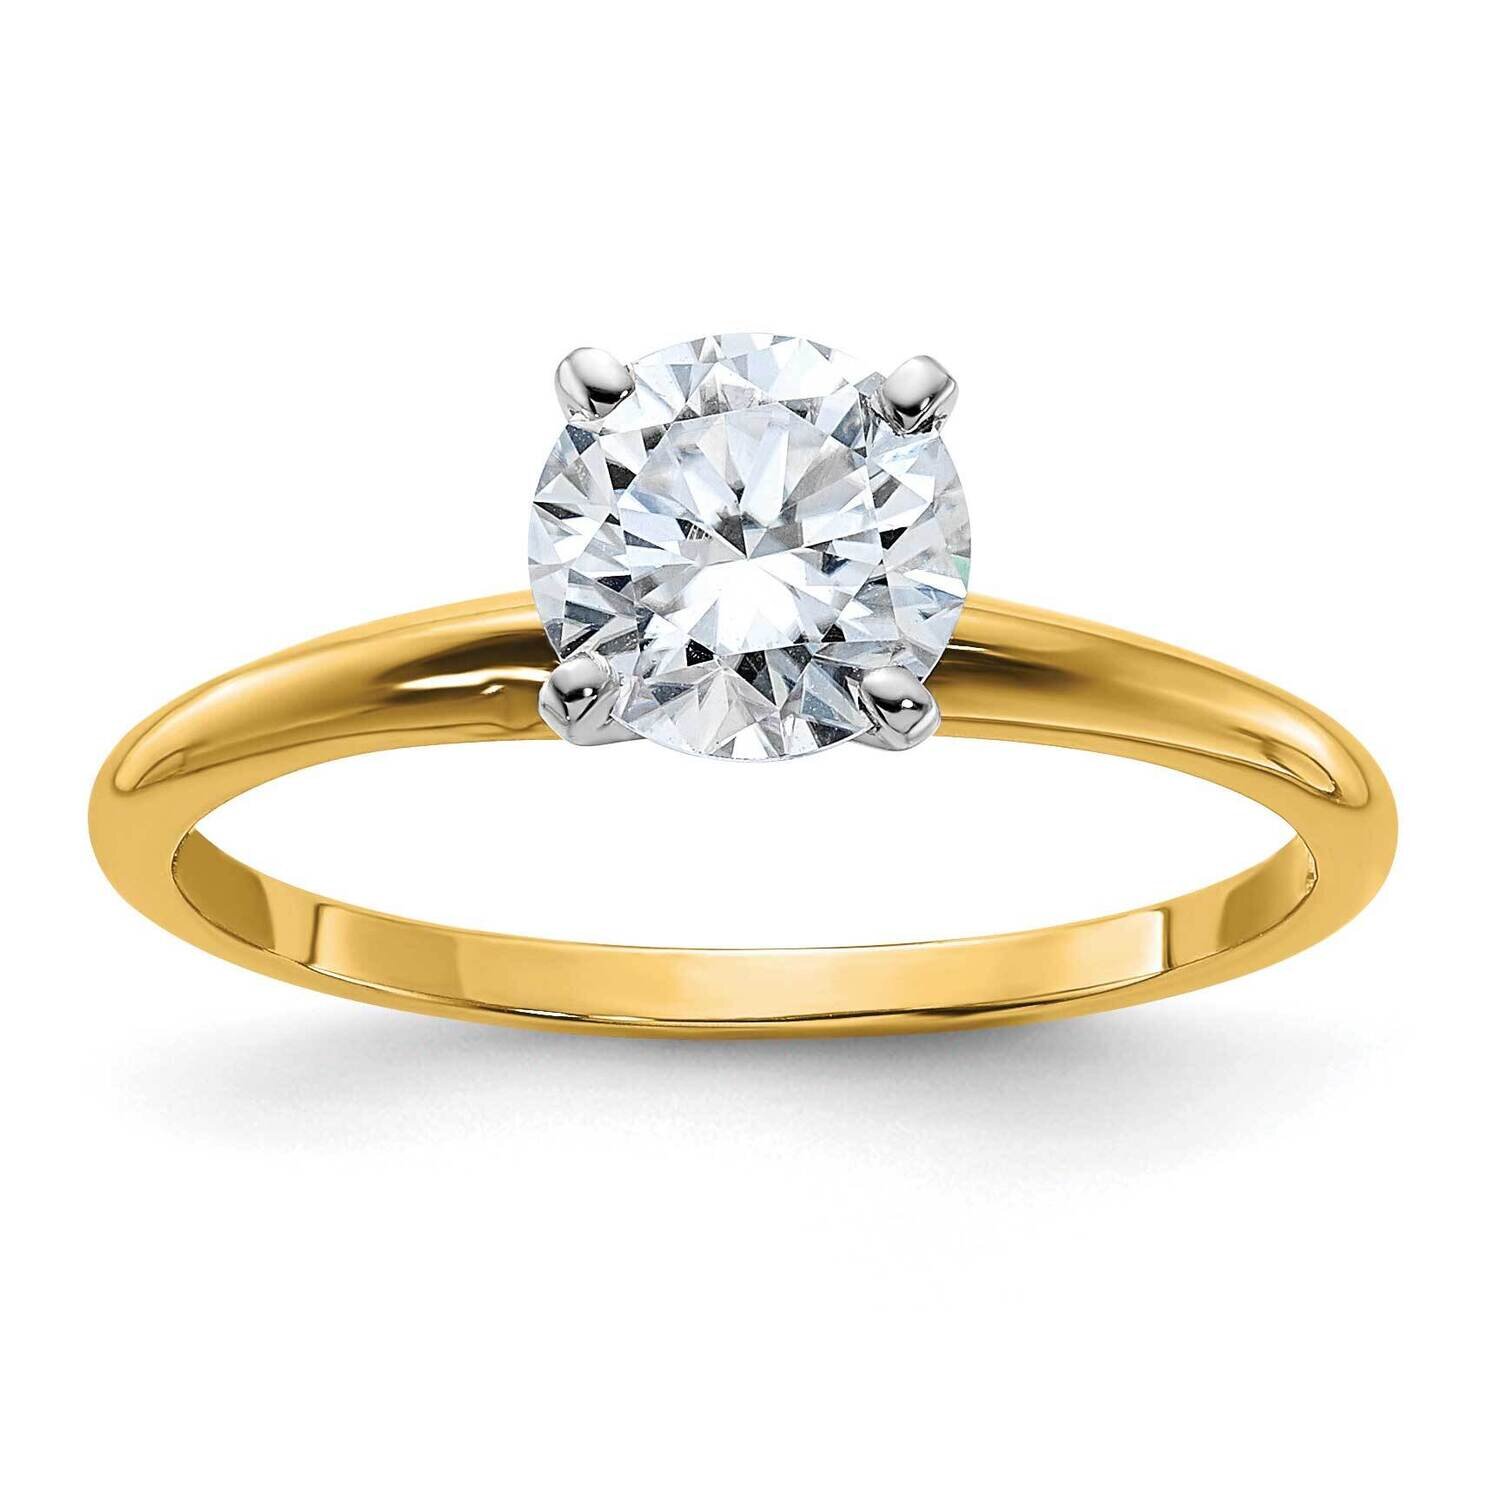 1ct. D E F Pure Light Round Moissanite Solitaire Ring 14k Gold YGSH15-12MP-7